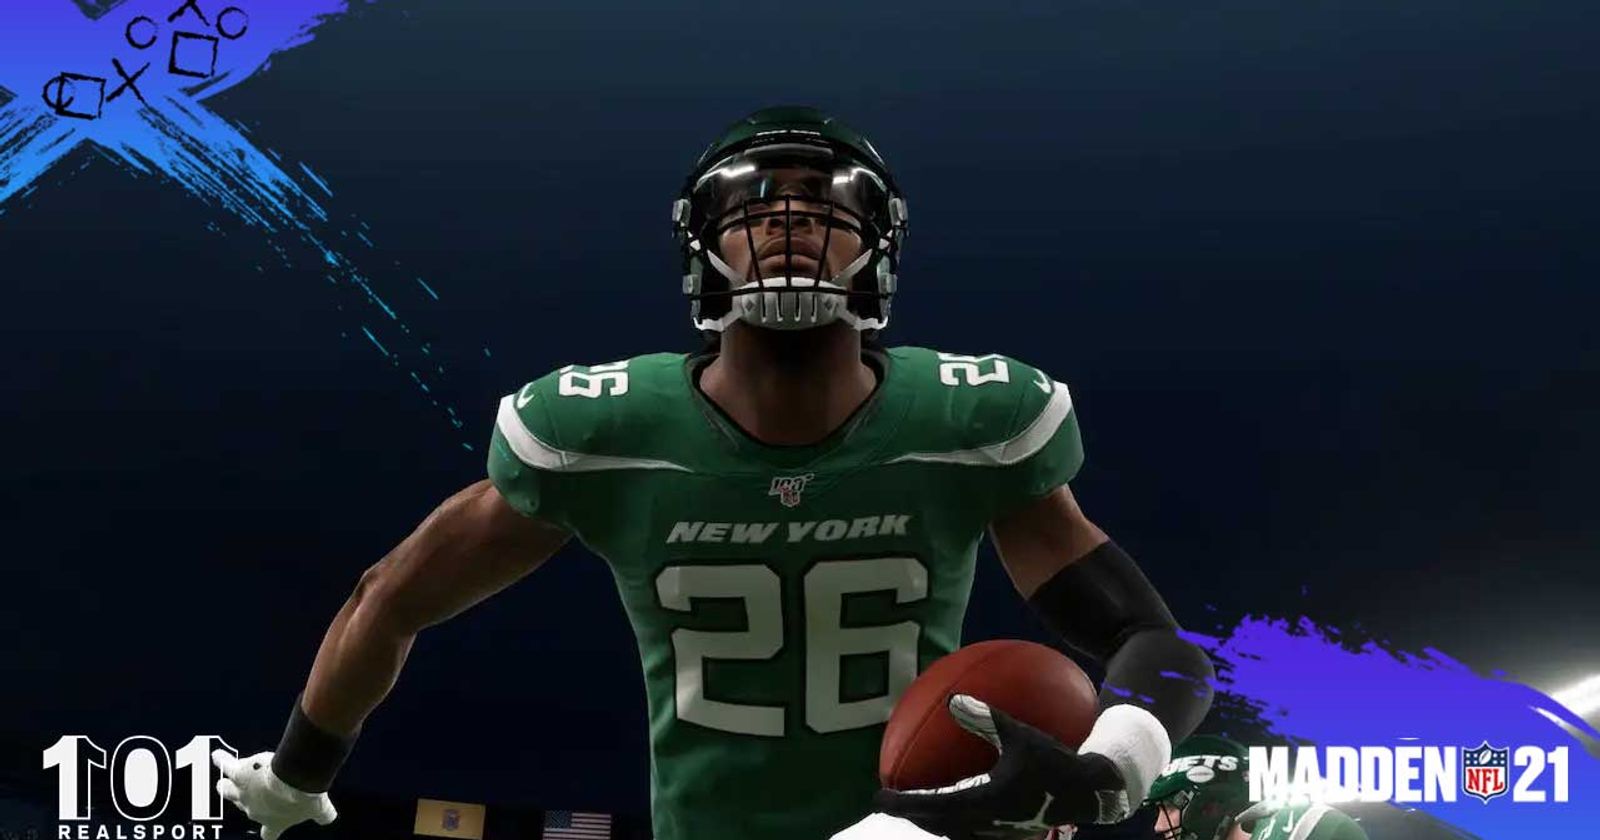 Madden 21: New York Jets Theme Team MUT 21 Guide - Kevin Mawae, Avery  Williamson, Marcus Maye, Frank Gore & more